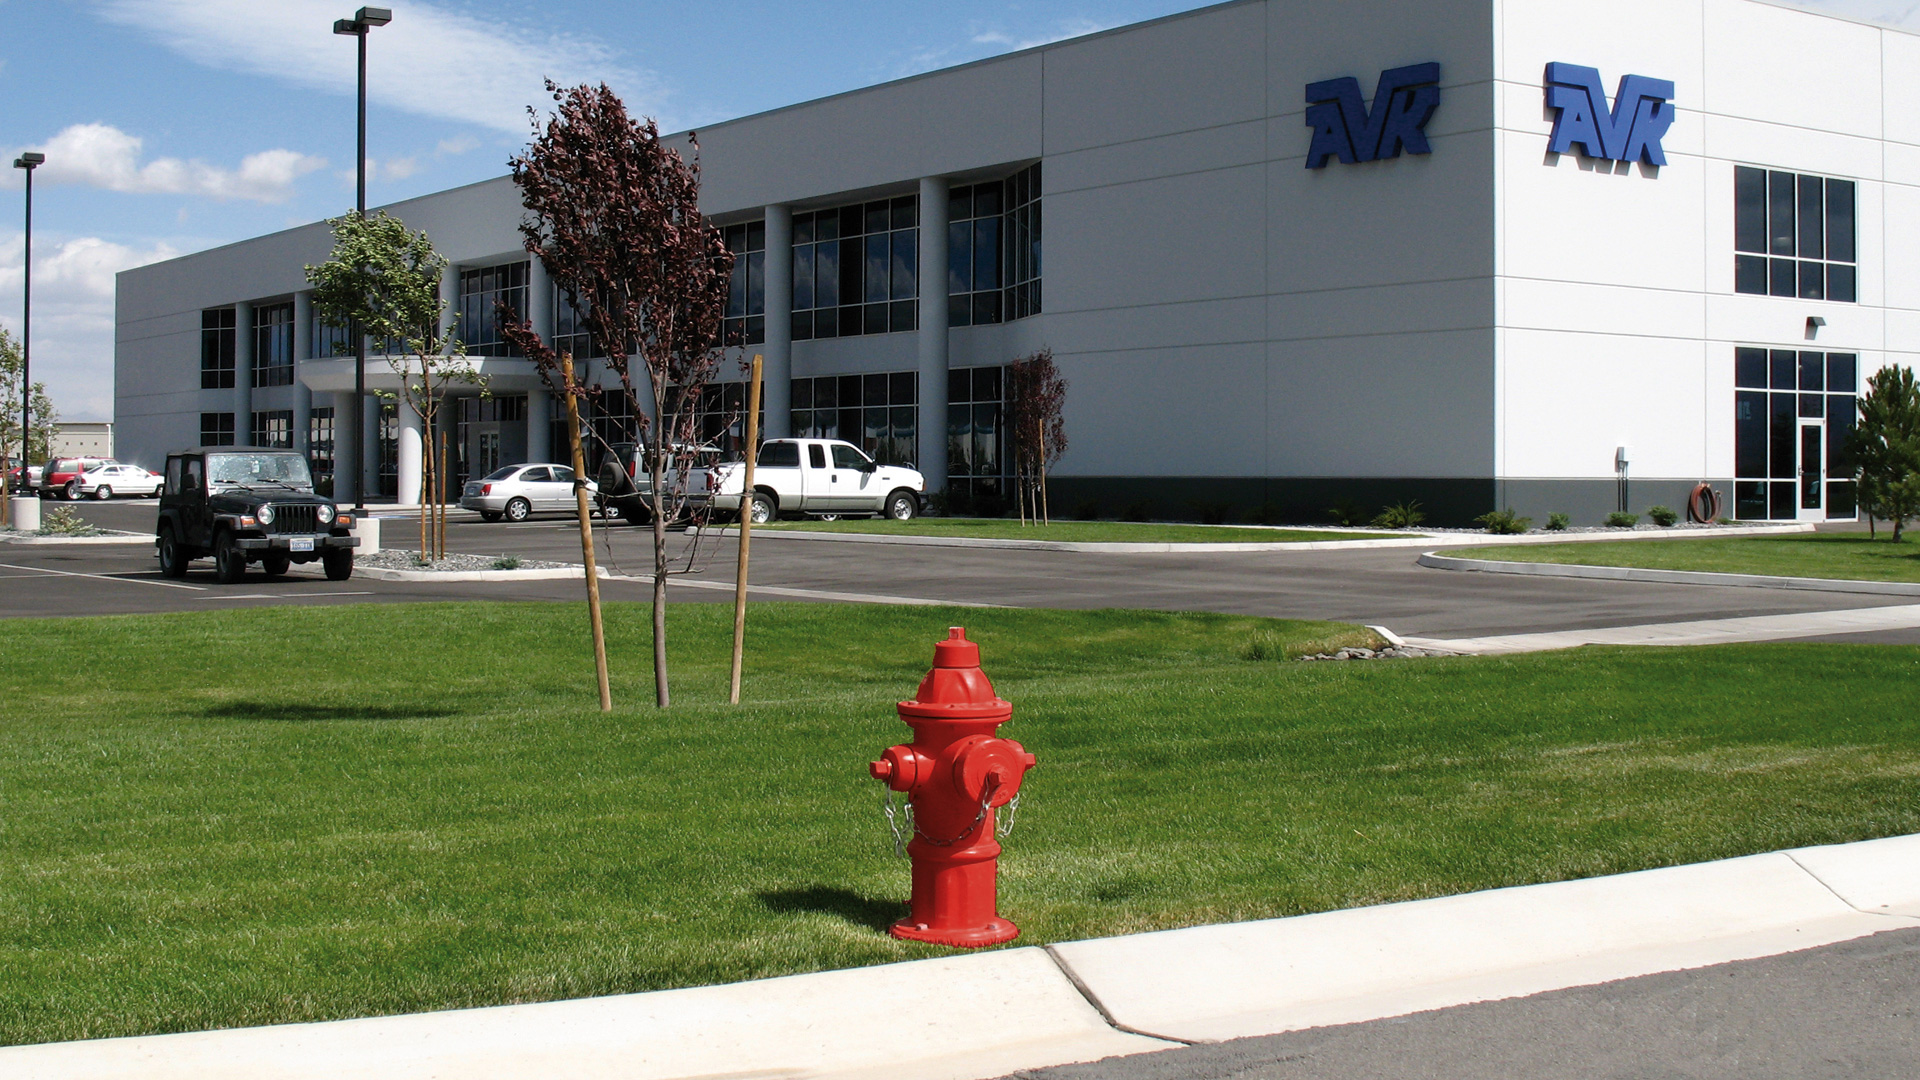 AVK hydrant installed in front of American AVK